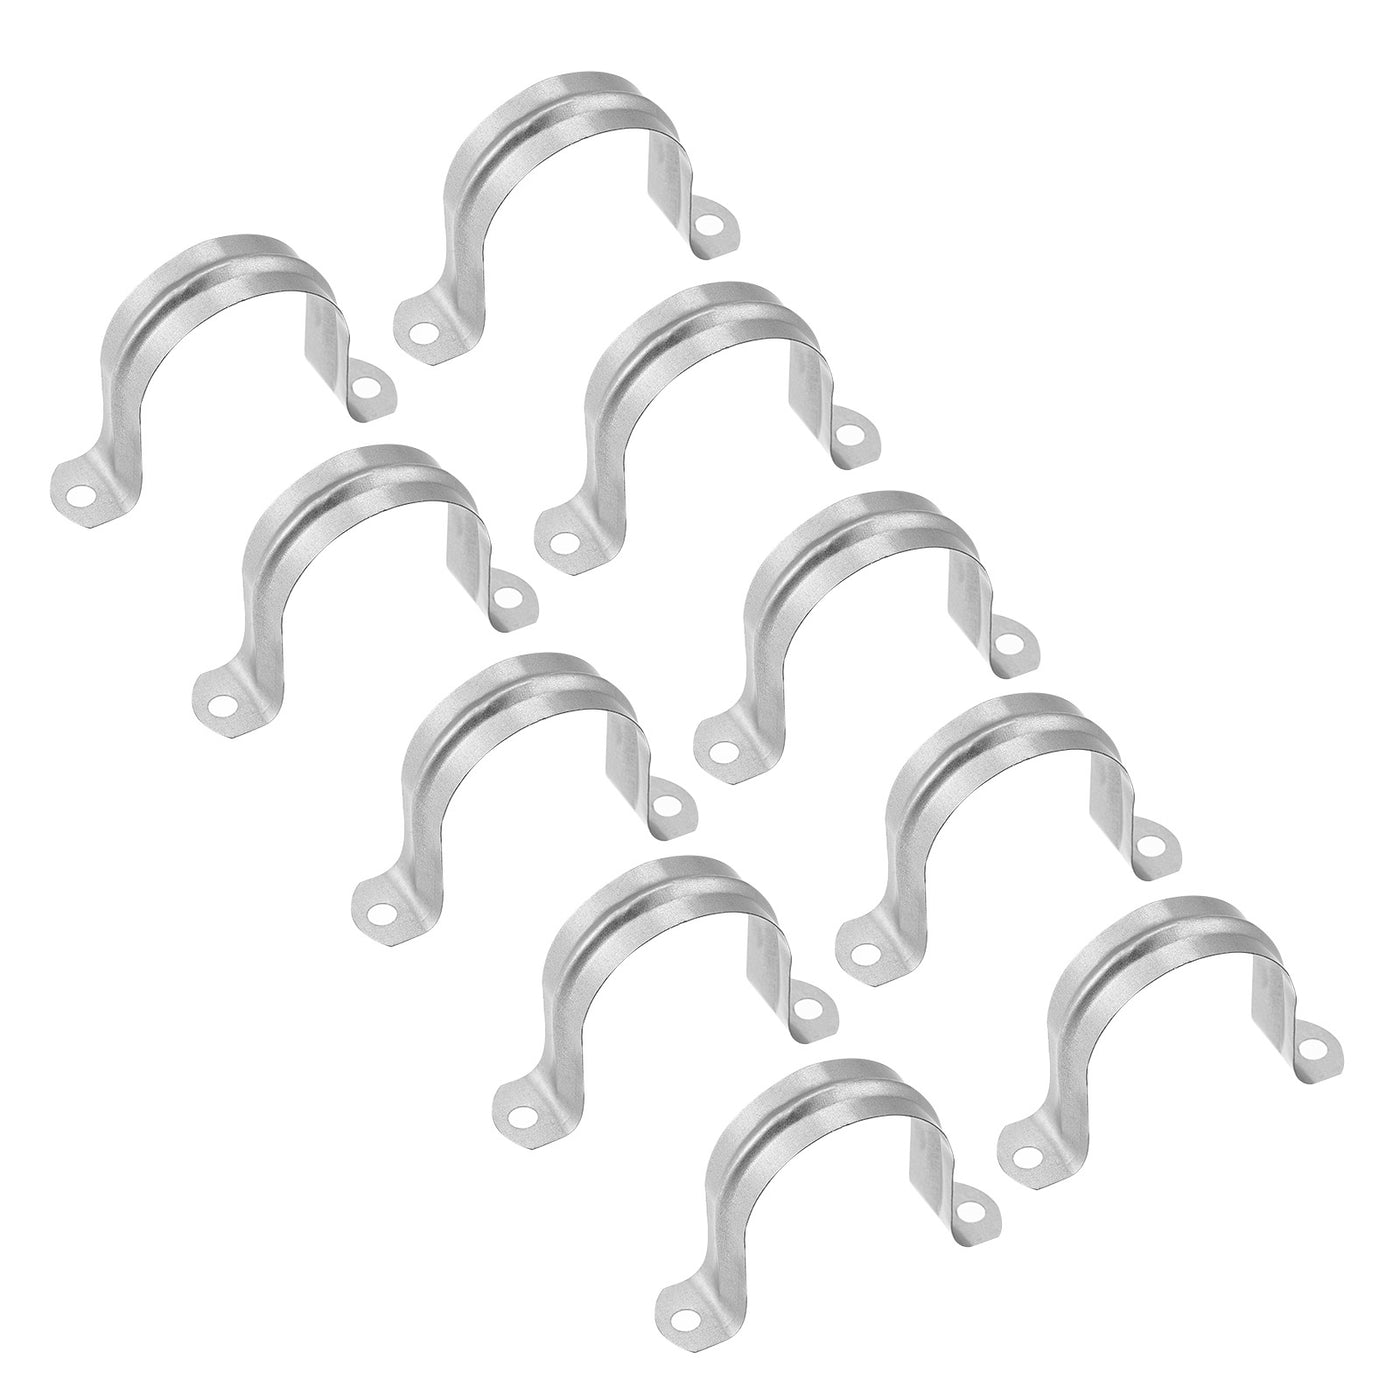 uxcell Uxcell Rigid Pipe Strap 16pcs 1 5/8" (40mm) Carbon Steel U Bracket Tension Tube Clamp